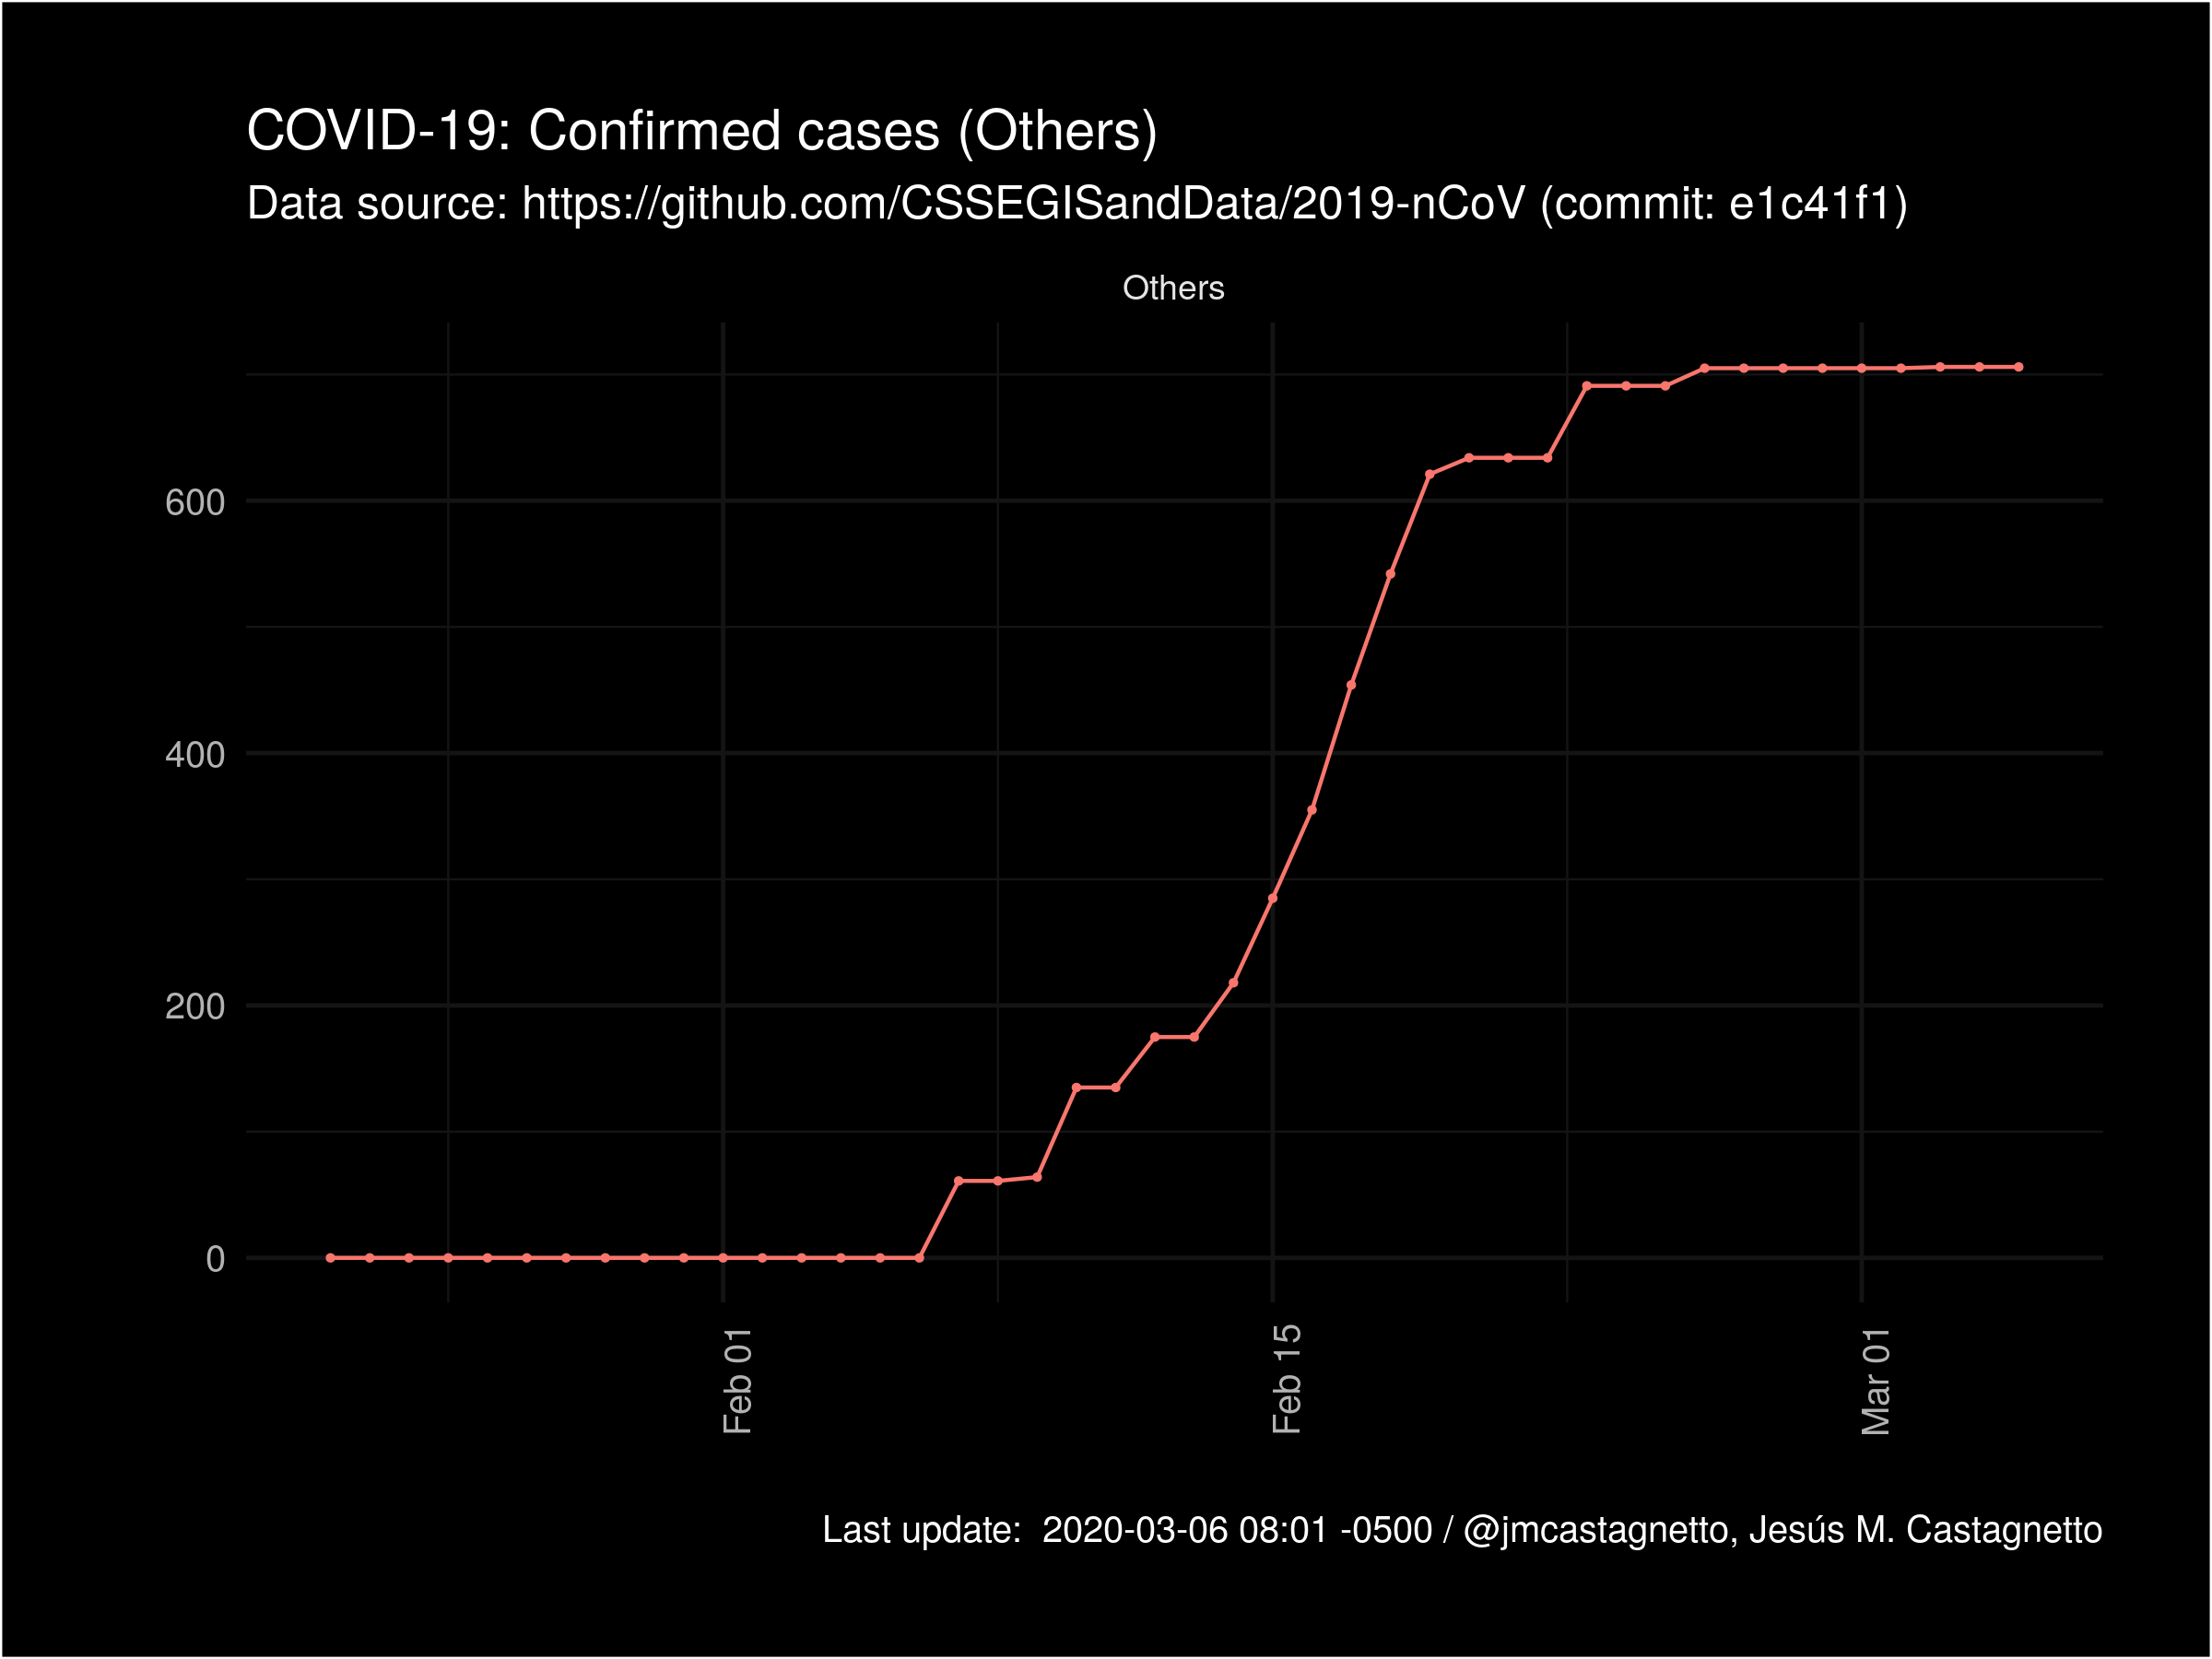 COVID-19 Confirmed cases by country (Others)